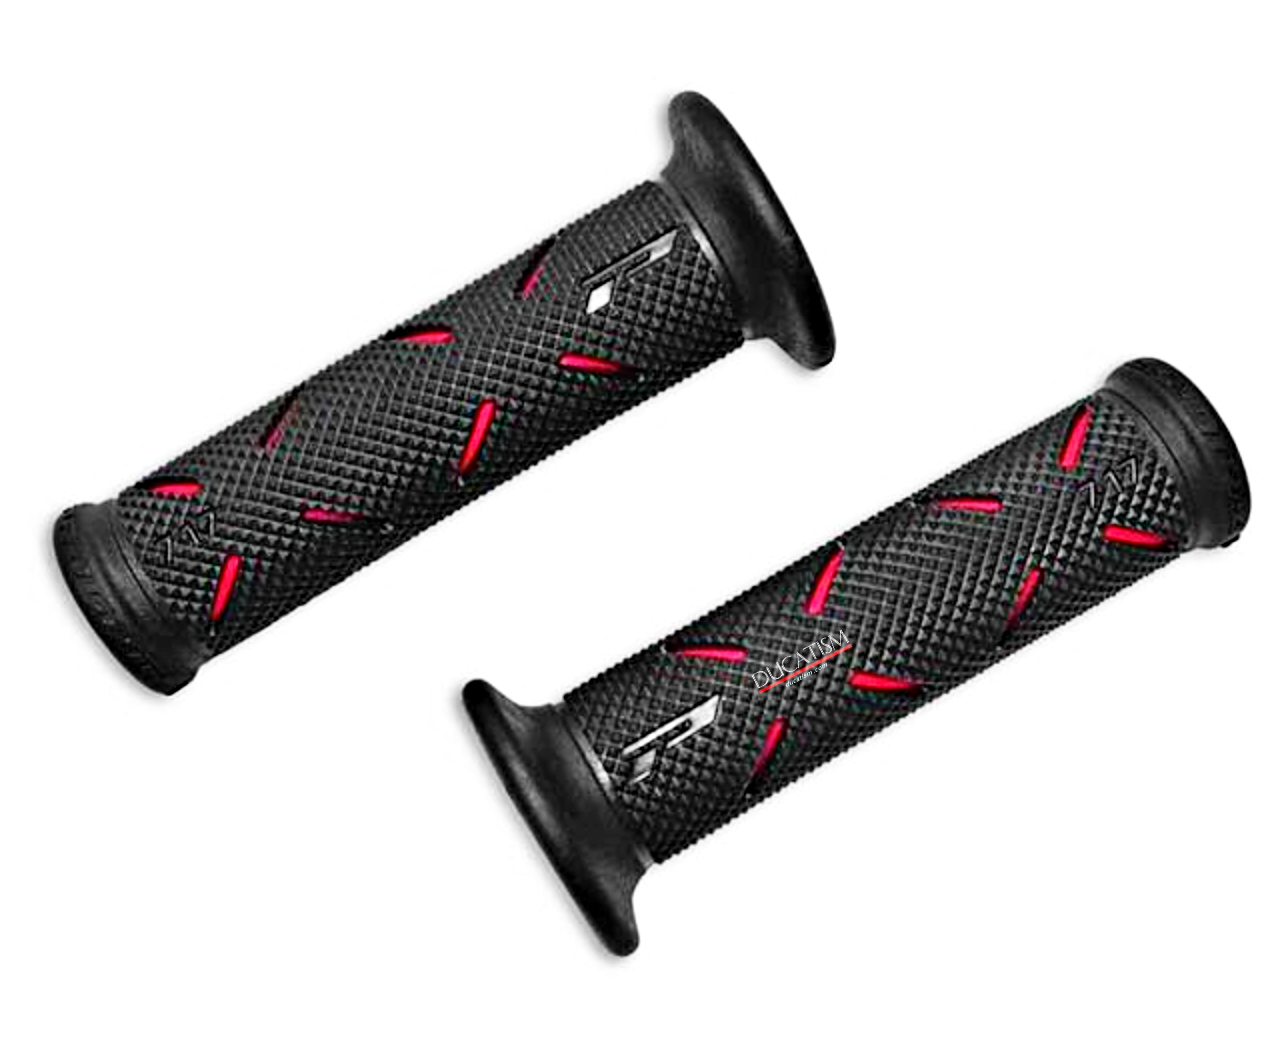 In stock PROGRIP Superbike 717 Grip Racing Pro Grip Superbike DUCATI Genuine Part Number 96280611AA 96280611AB Panigale V4